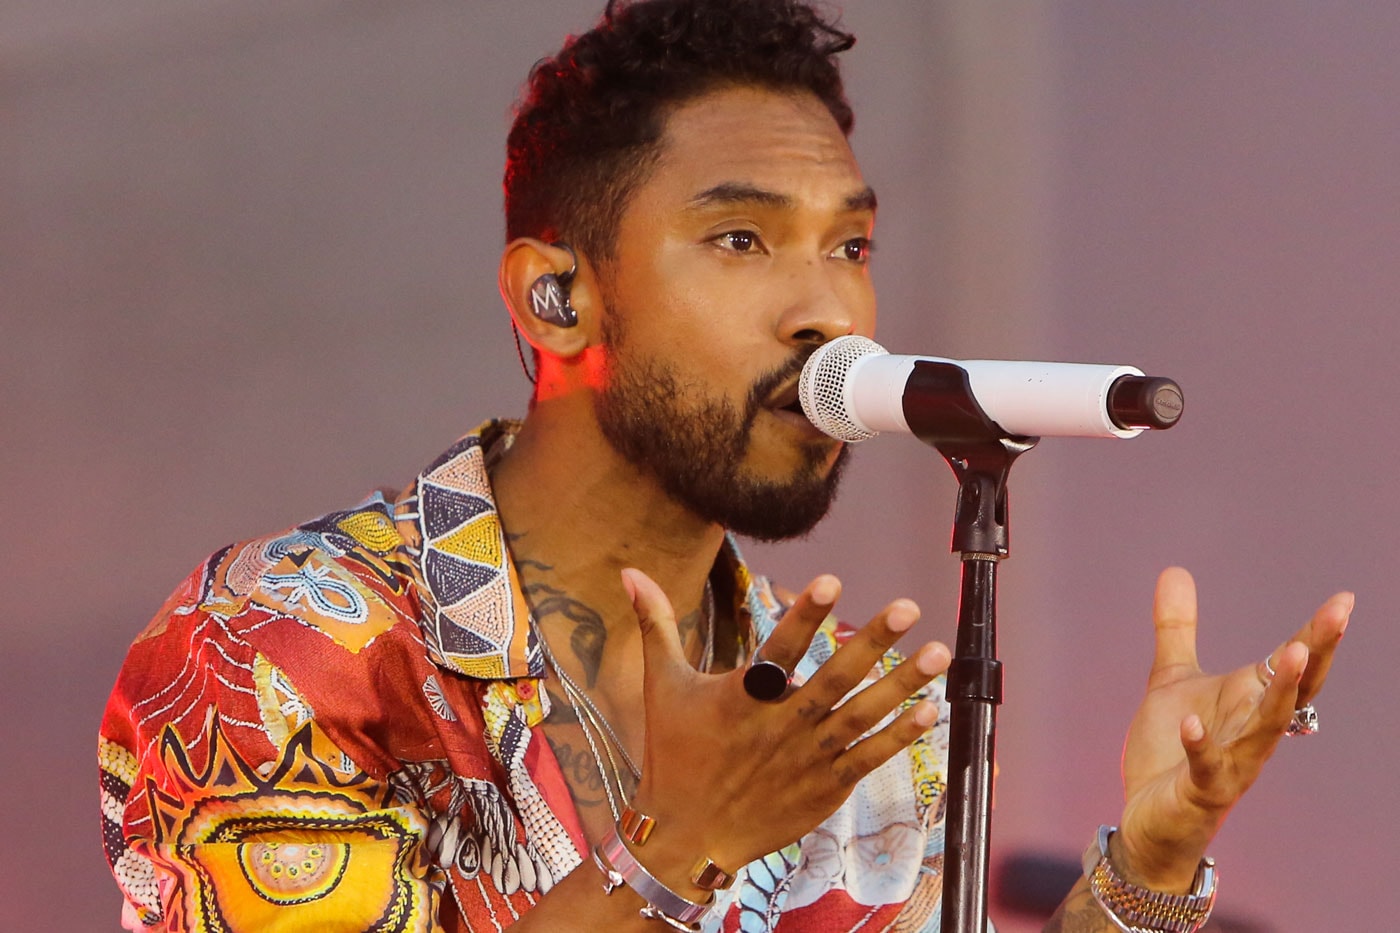 Watch Miguel Perform "Simplethings" on 'Jimmy Fallon'